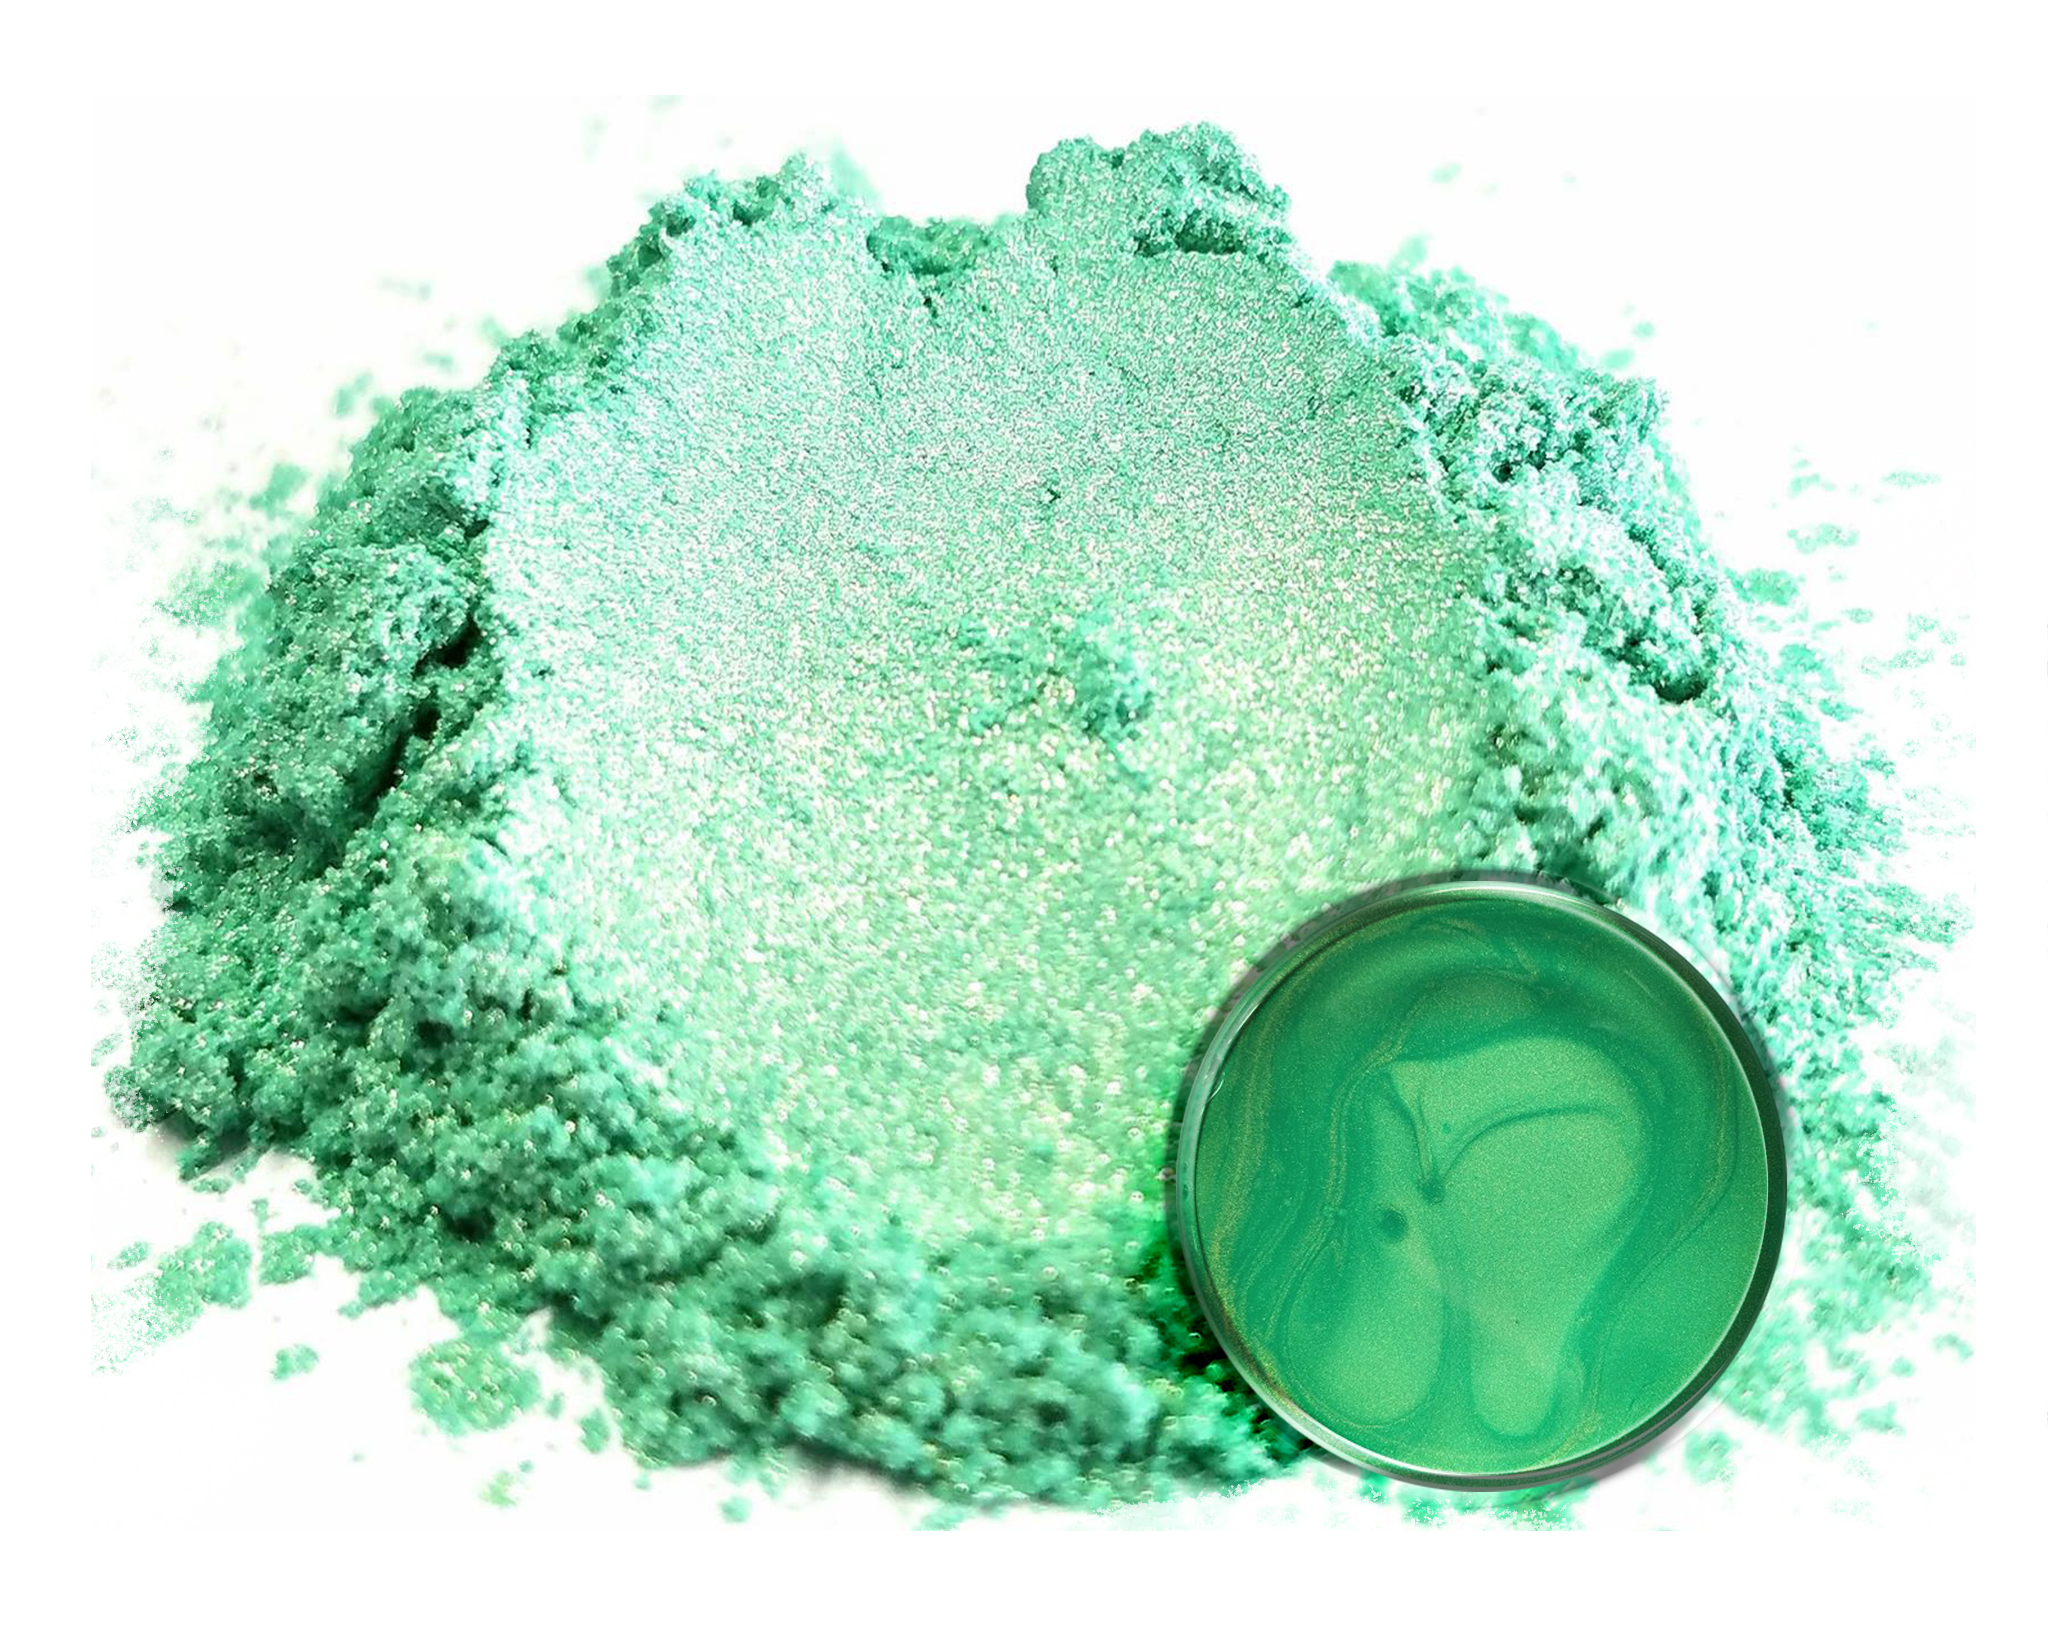 Macaw Blue Green - Eye Candy Pigments - Hues Series Mica Metallic Pigments